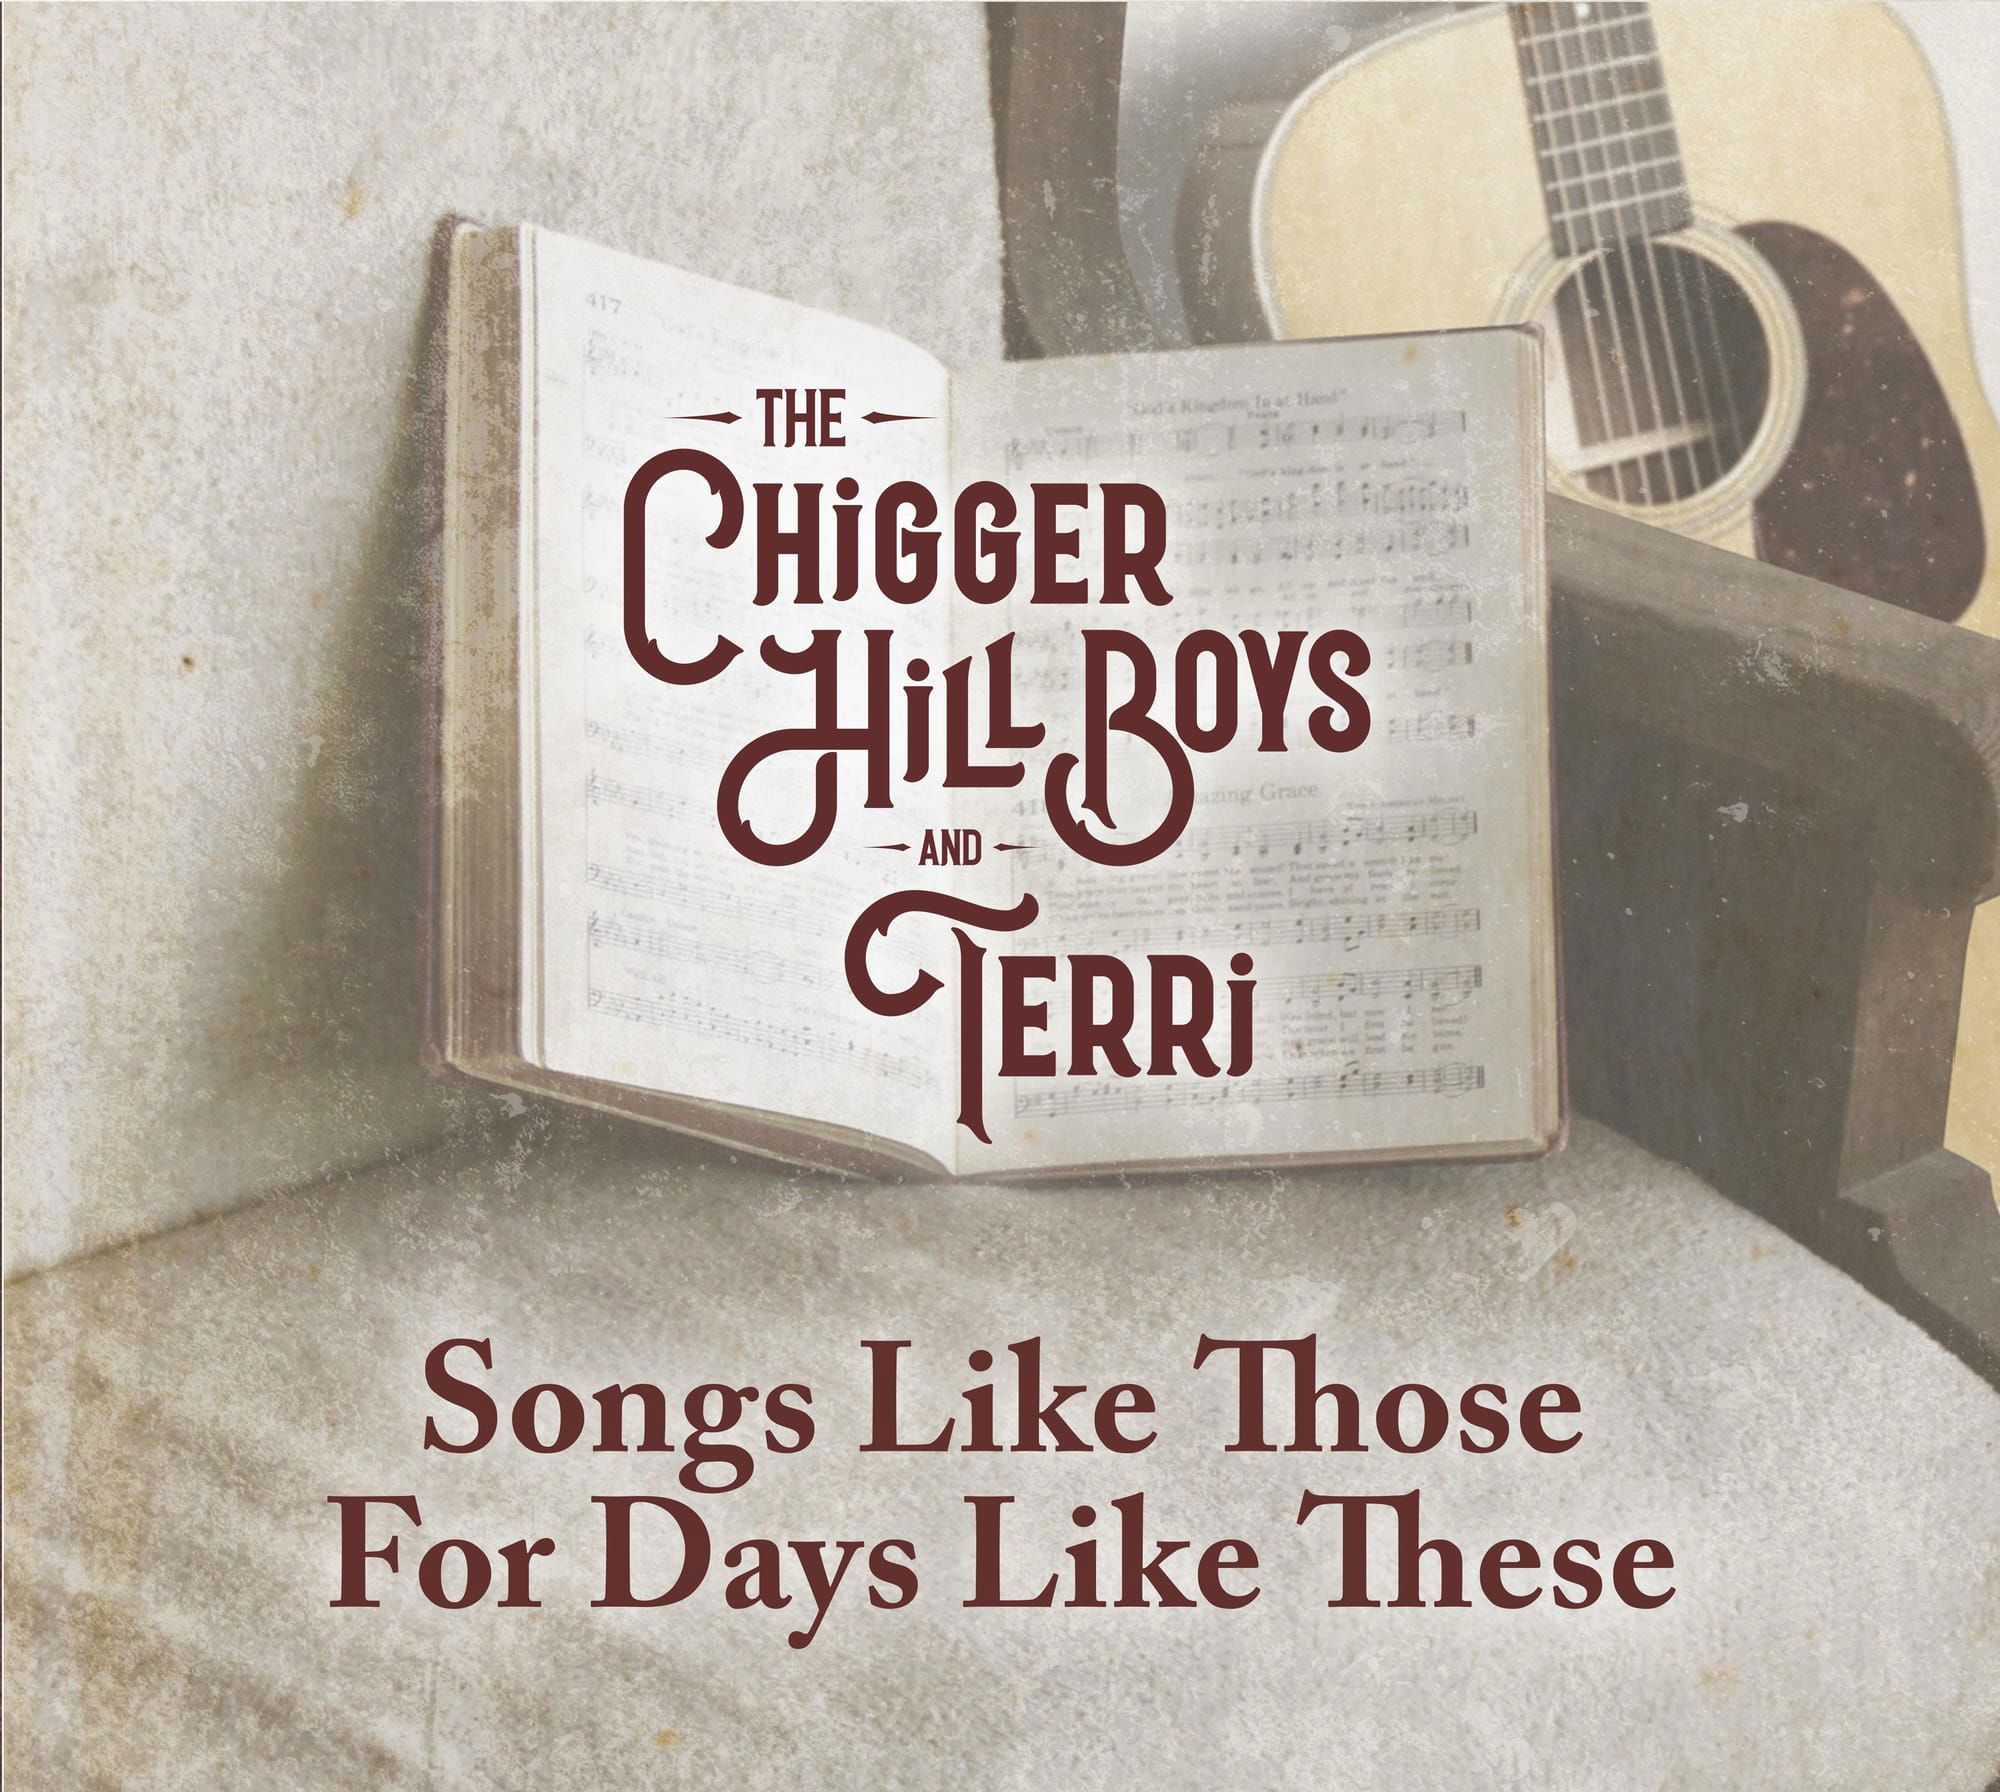 New Chigger Hill Boys & Terri album, "Songs Like Those For Days Like These"